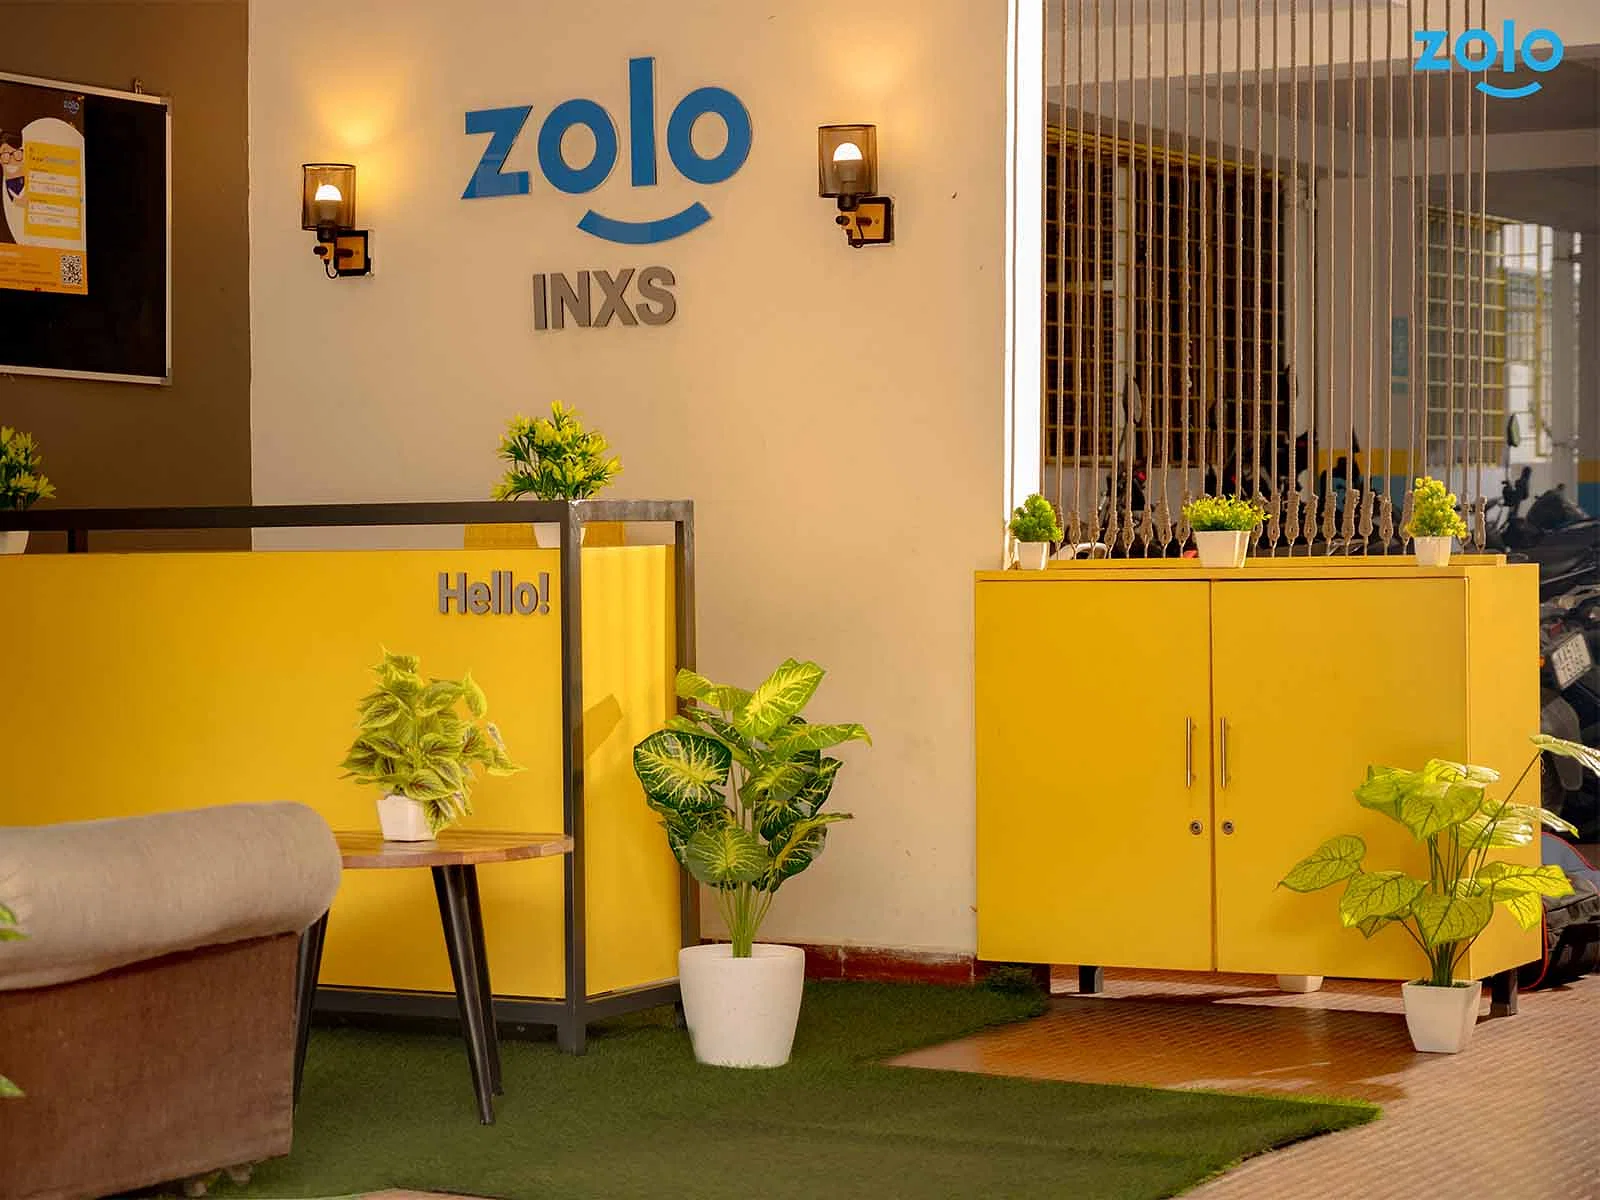 Fully furnished single/sharing rooms for rent in HSR Layout with no brokerage-apply fast-Zolo Inxs